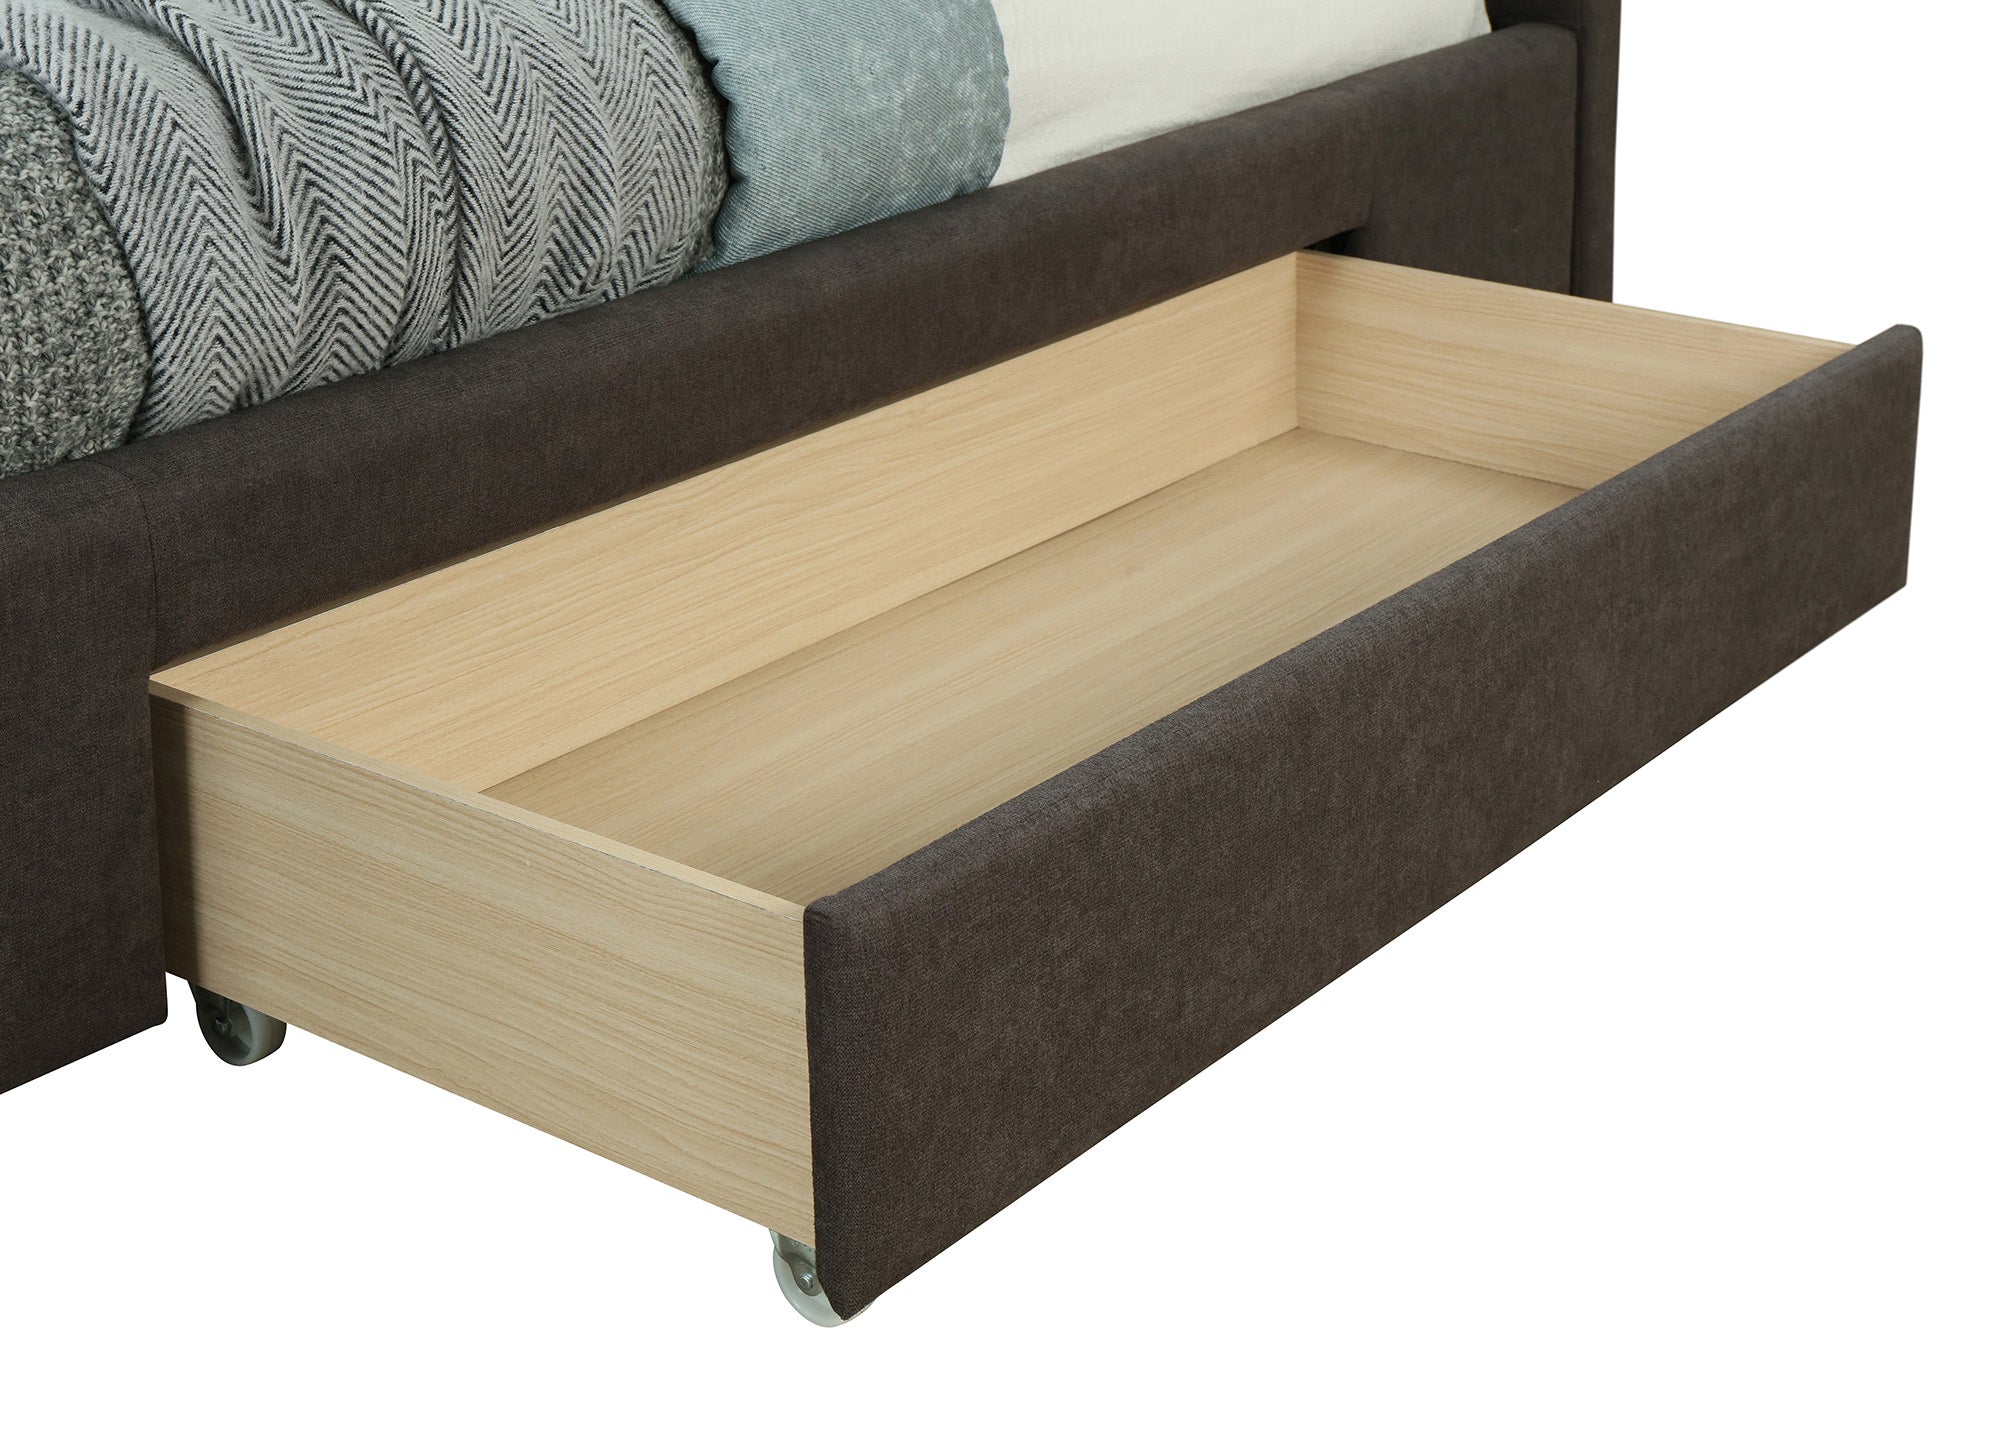 EMILIO-78'' BED-CHARCOAL